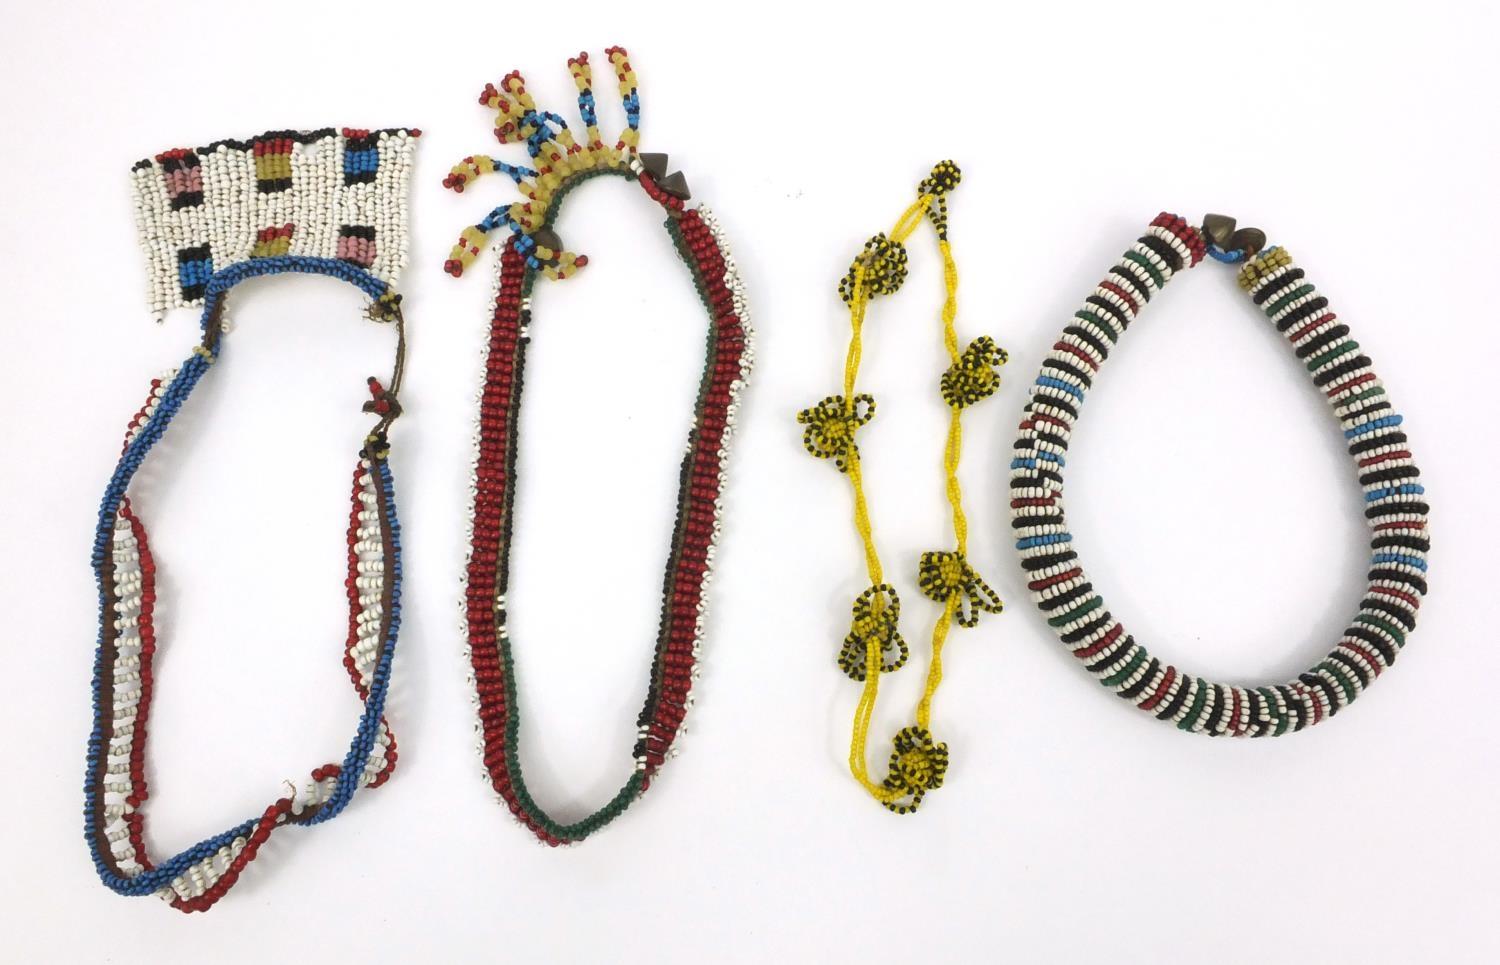 Four tribal beadwork necklaces, the largest 27cm long - Image 6 of 6